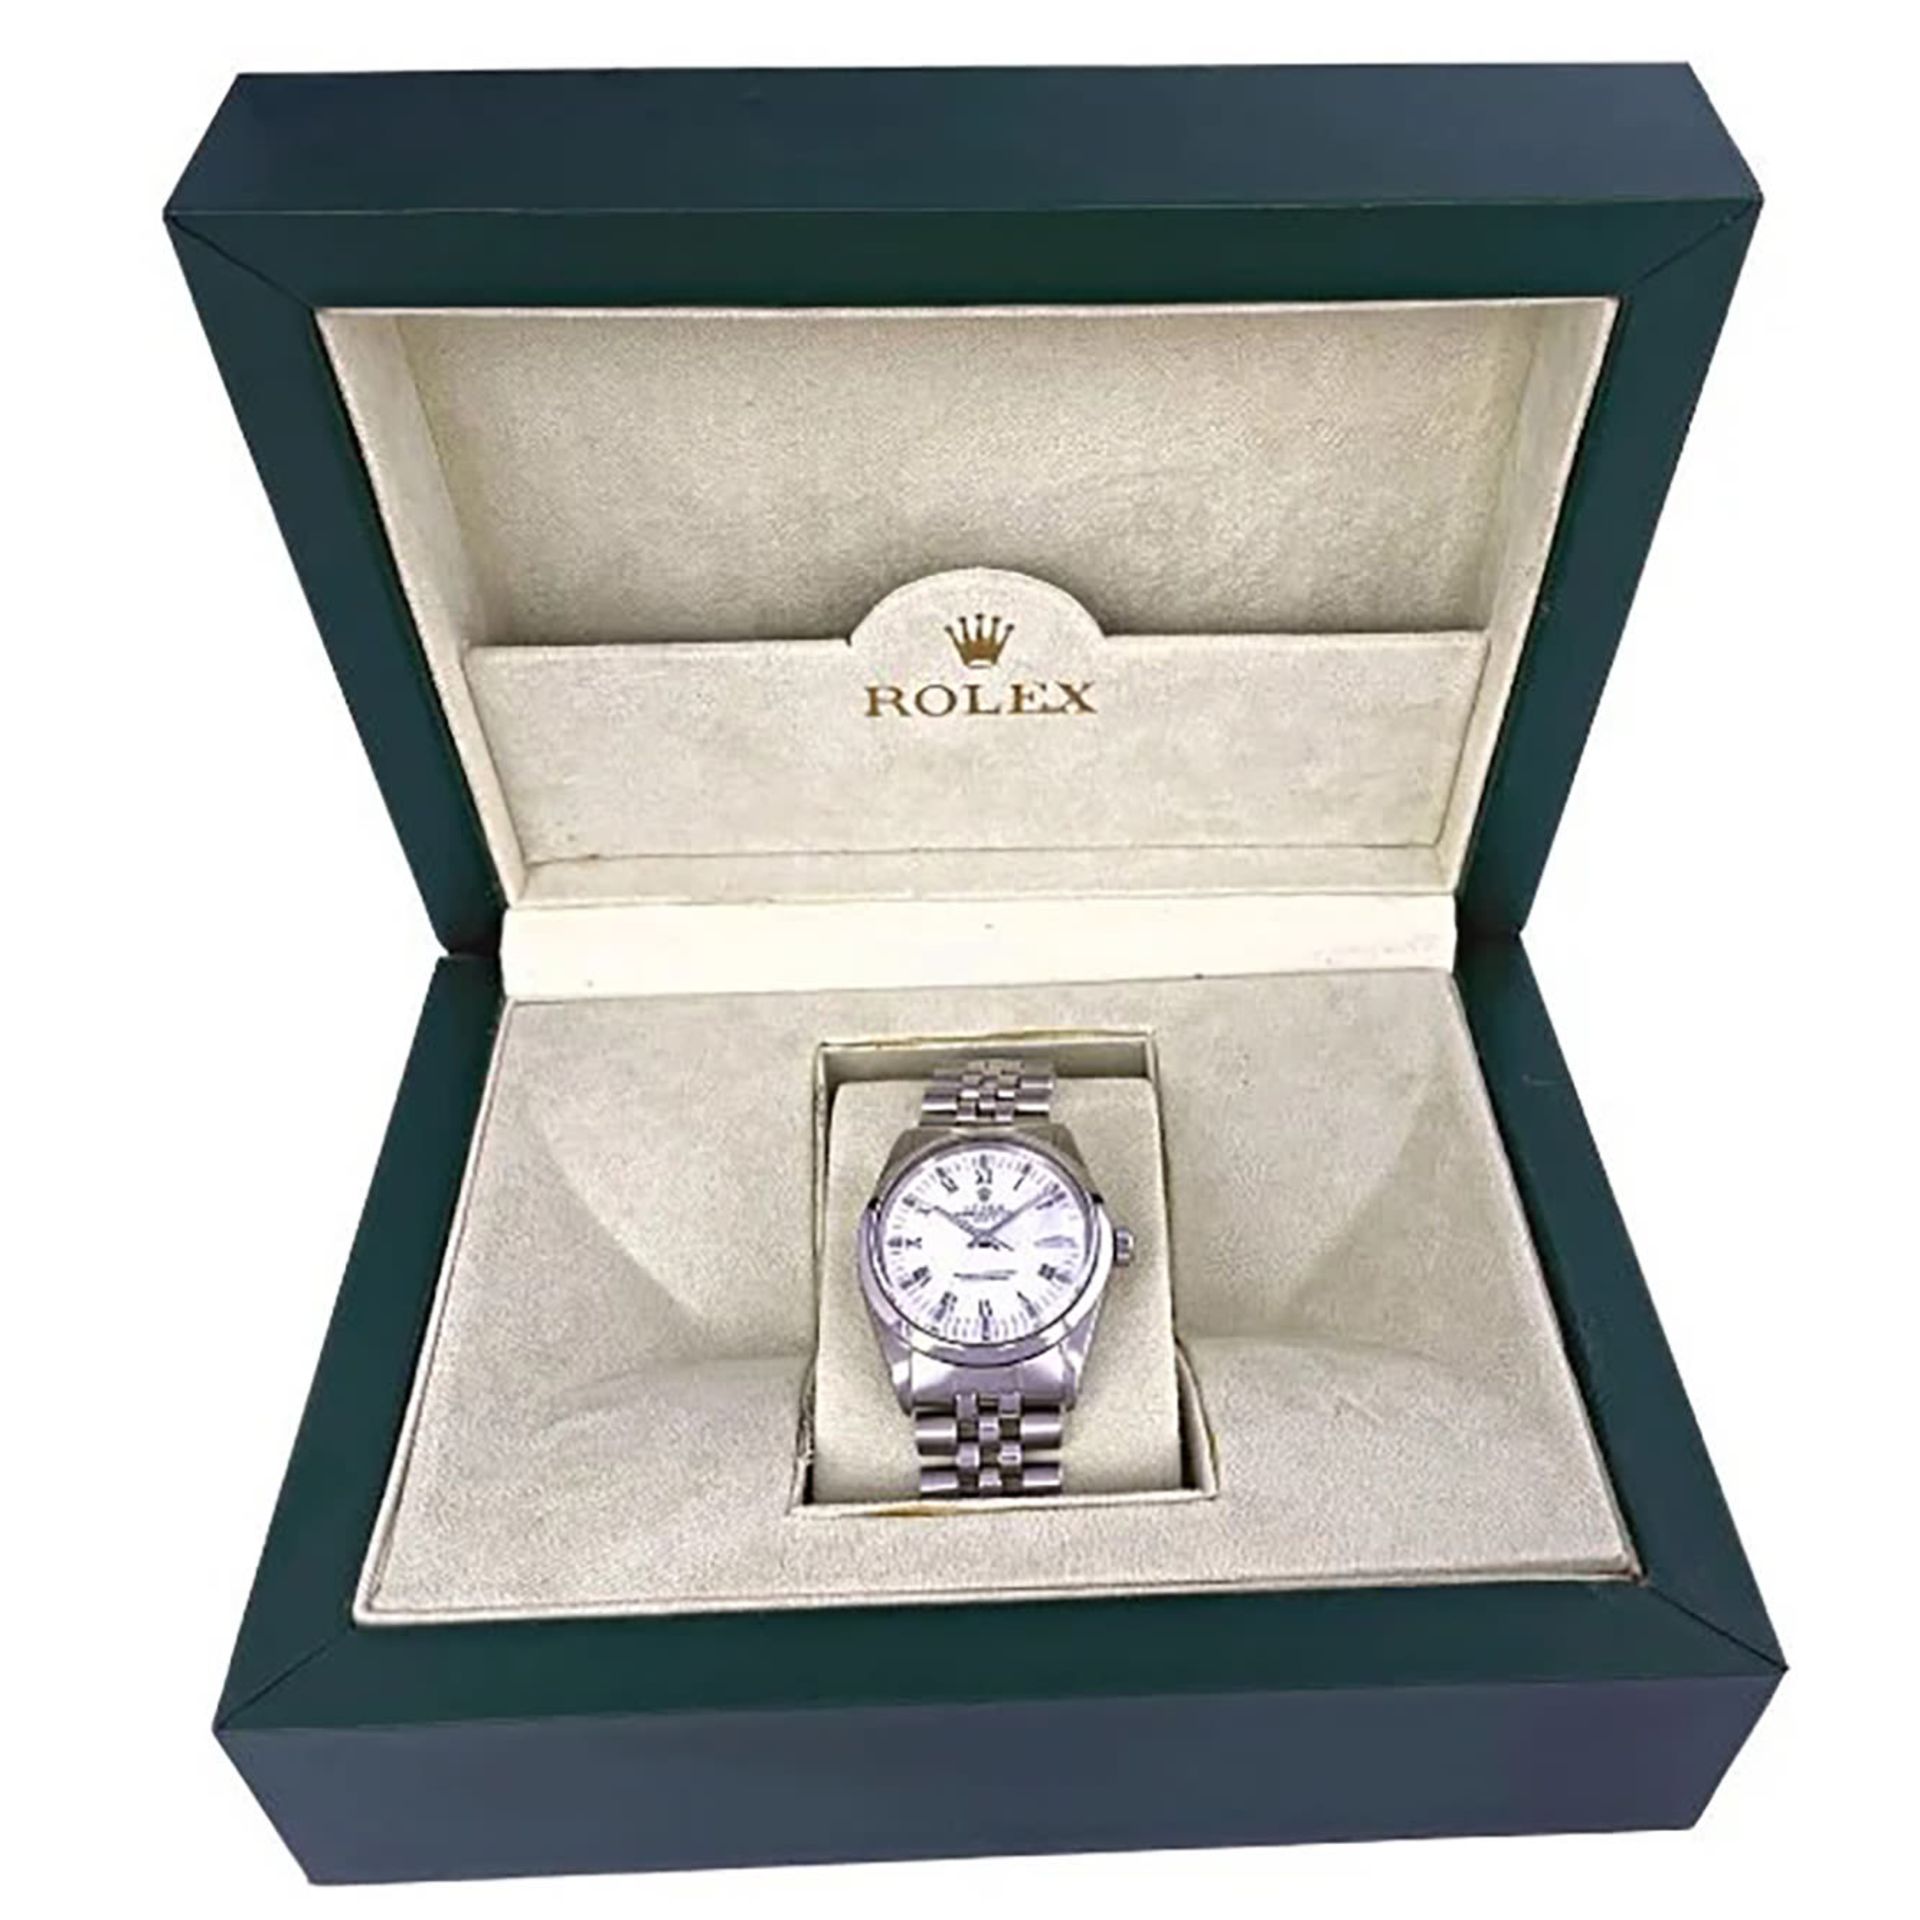 Oyster Perpetual Date Rolex Cadet size wristwatch, 1990s - Image 6 of 6